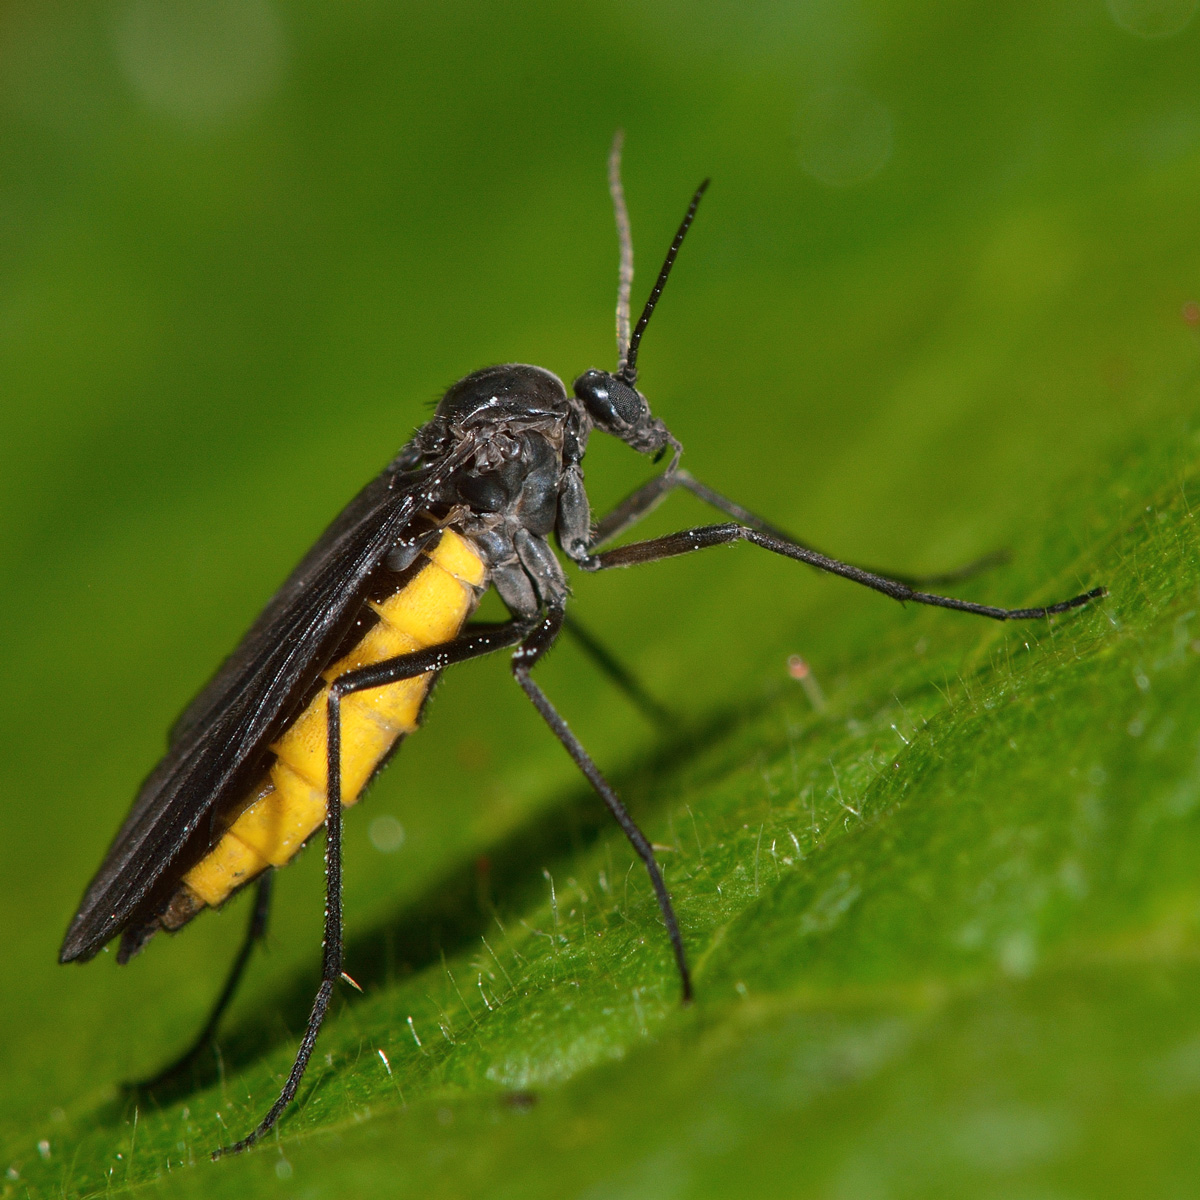 A distinctive fly with a bright yellow abdomen. Flies in the family Sciaridae are known as dark-winged fungus gnats